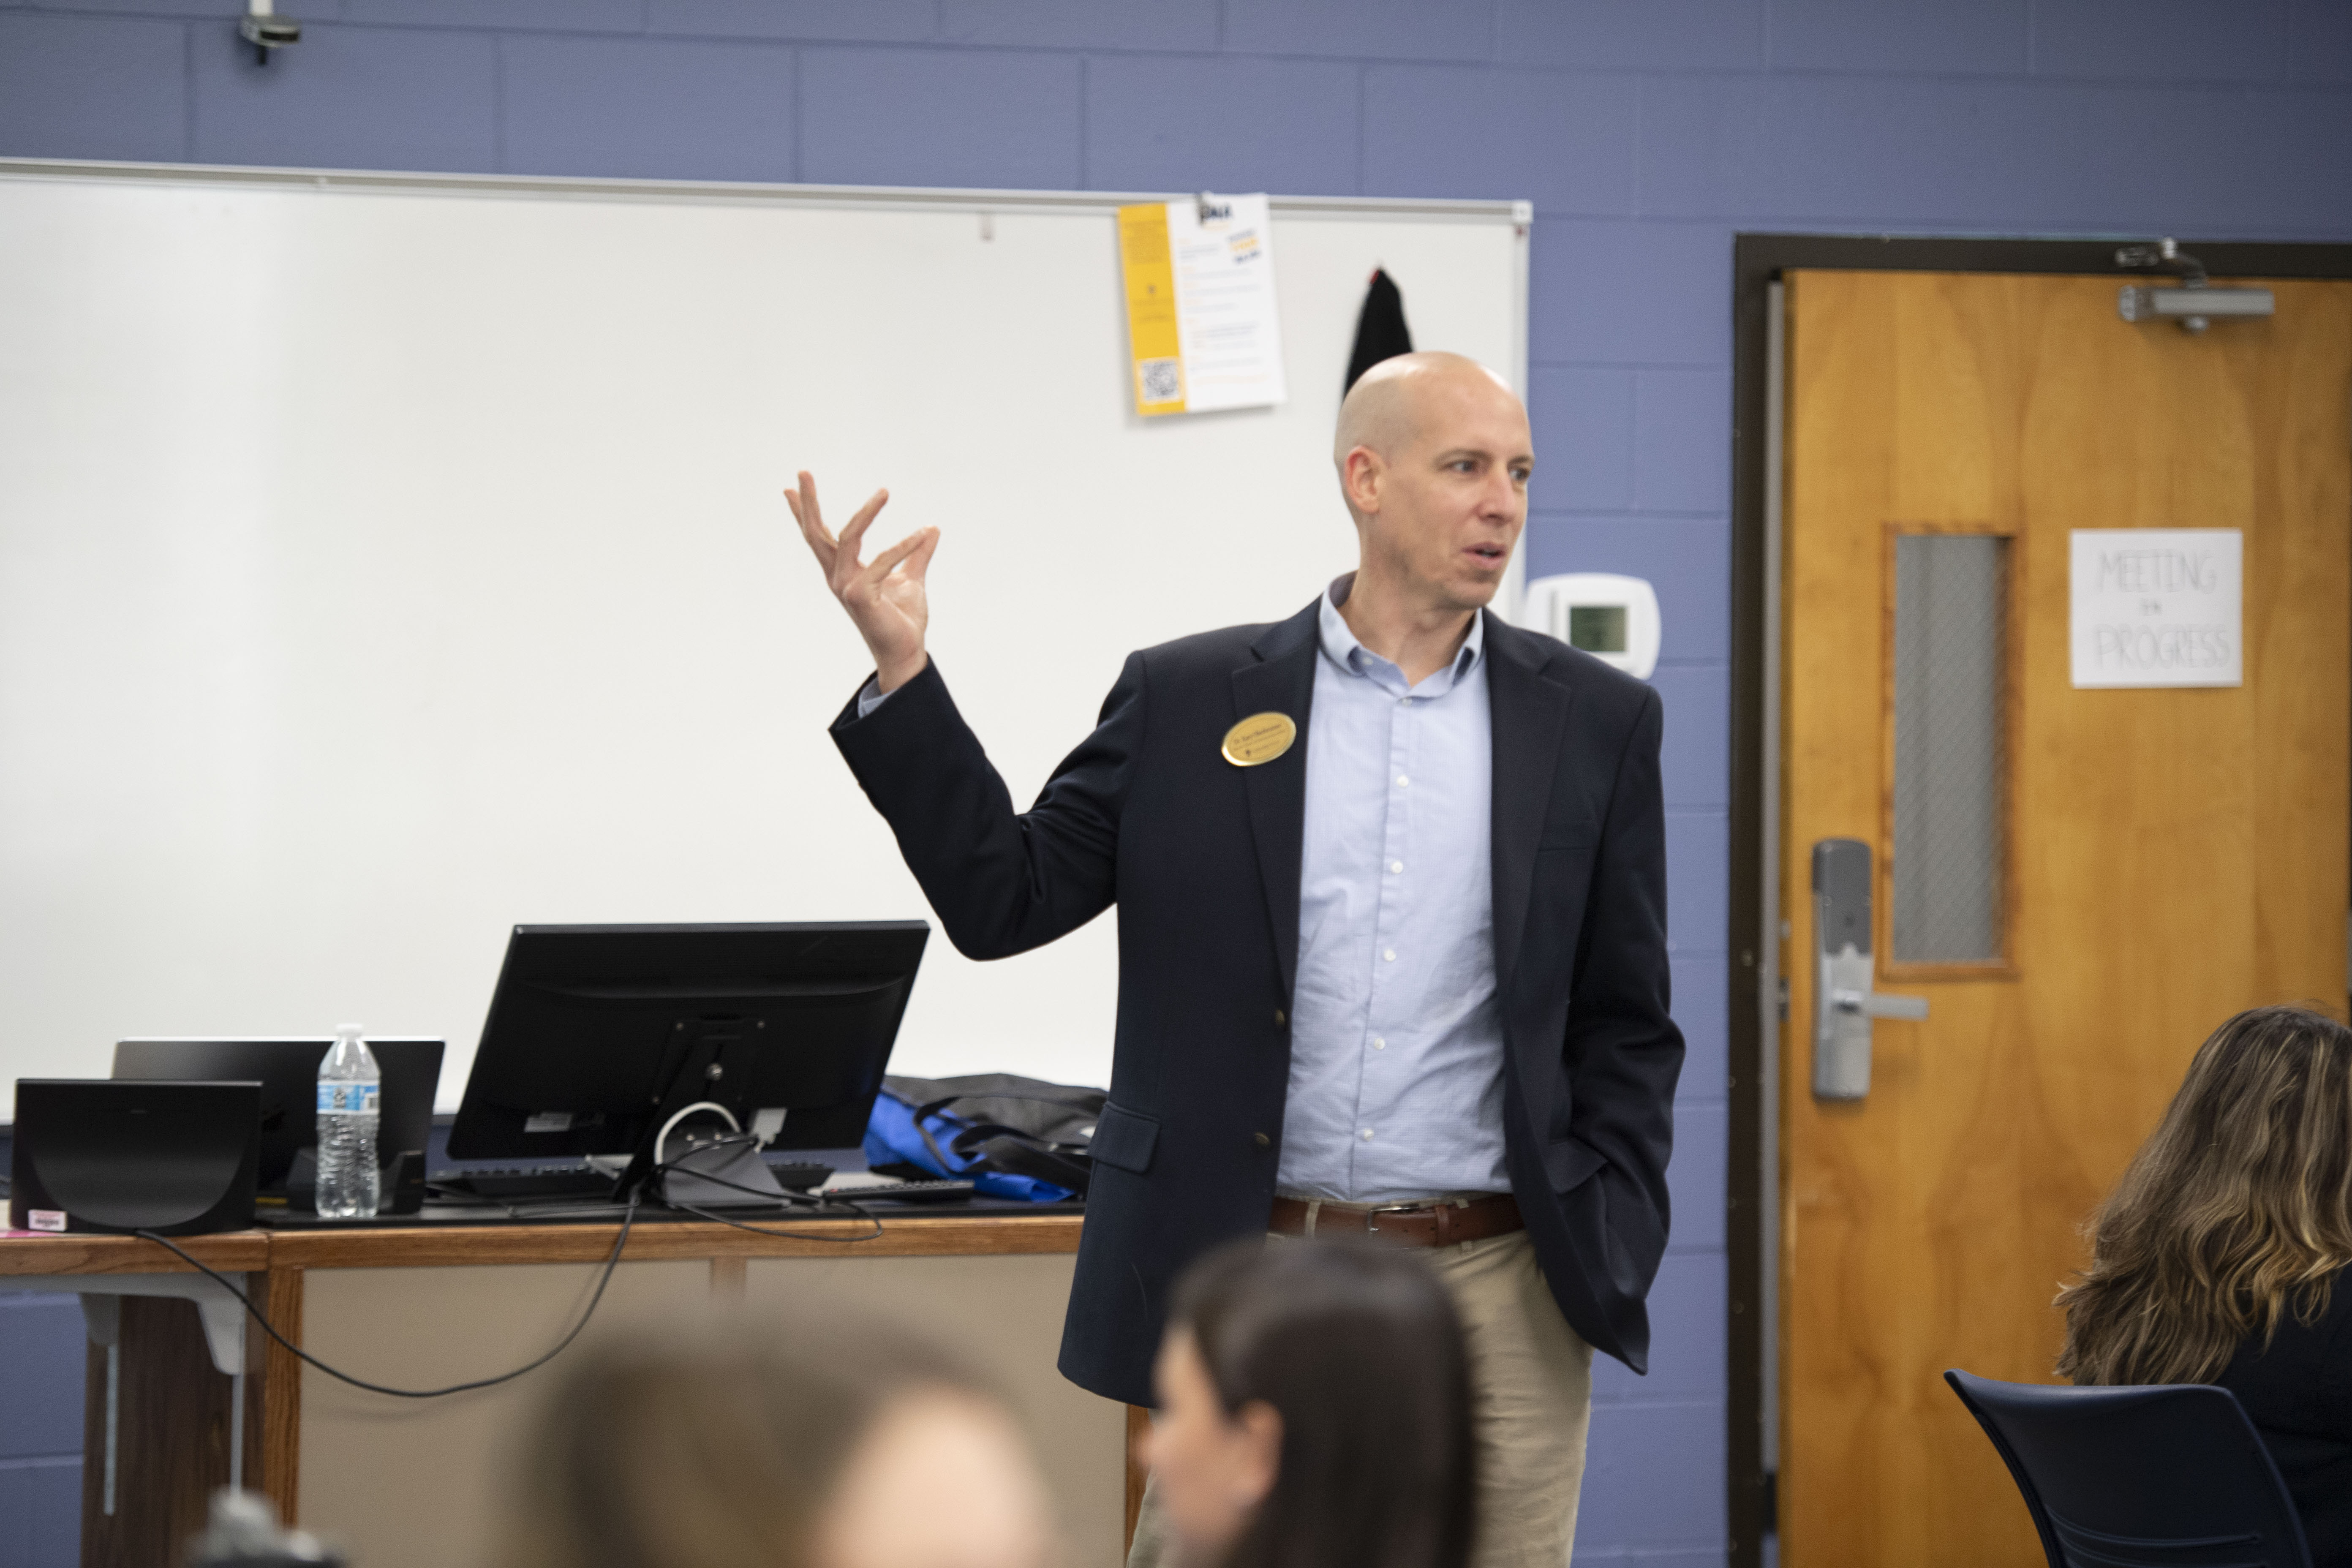 Dr. Kary Oberbrunner, a professor in the Robert W. Plaster School of Business at Cedarville University in Ohio, speaks to one of his classes about protecting intellectual property. Dr. Oberbrunner is a Wall Street Journal and USA Today Best-Selling author.